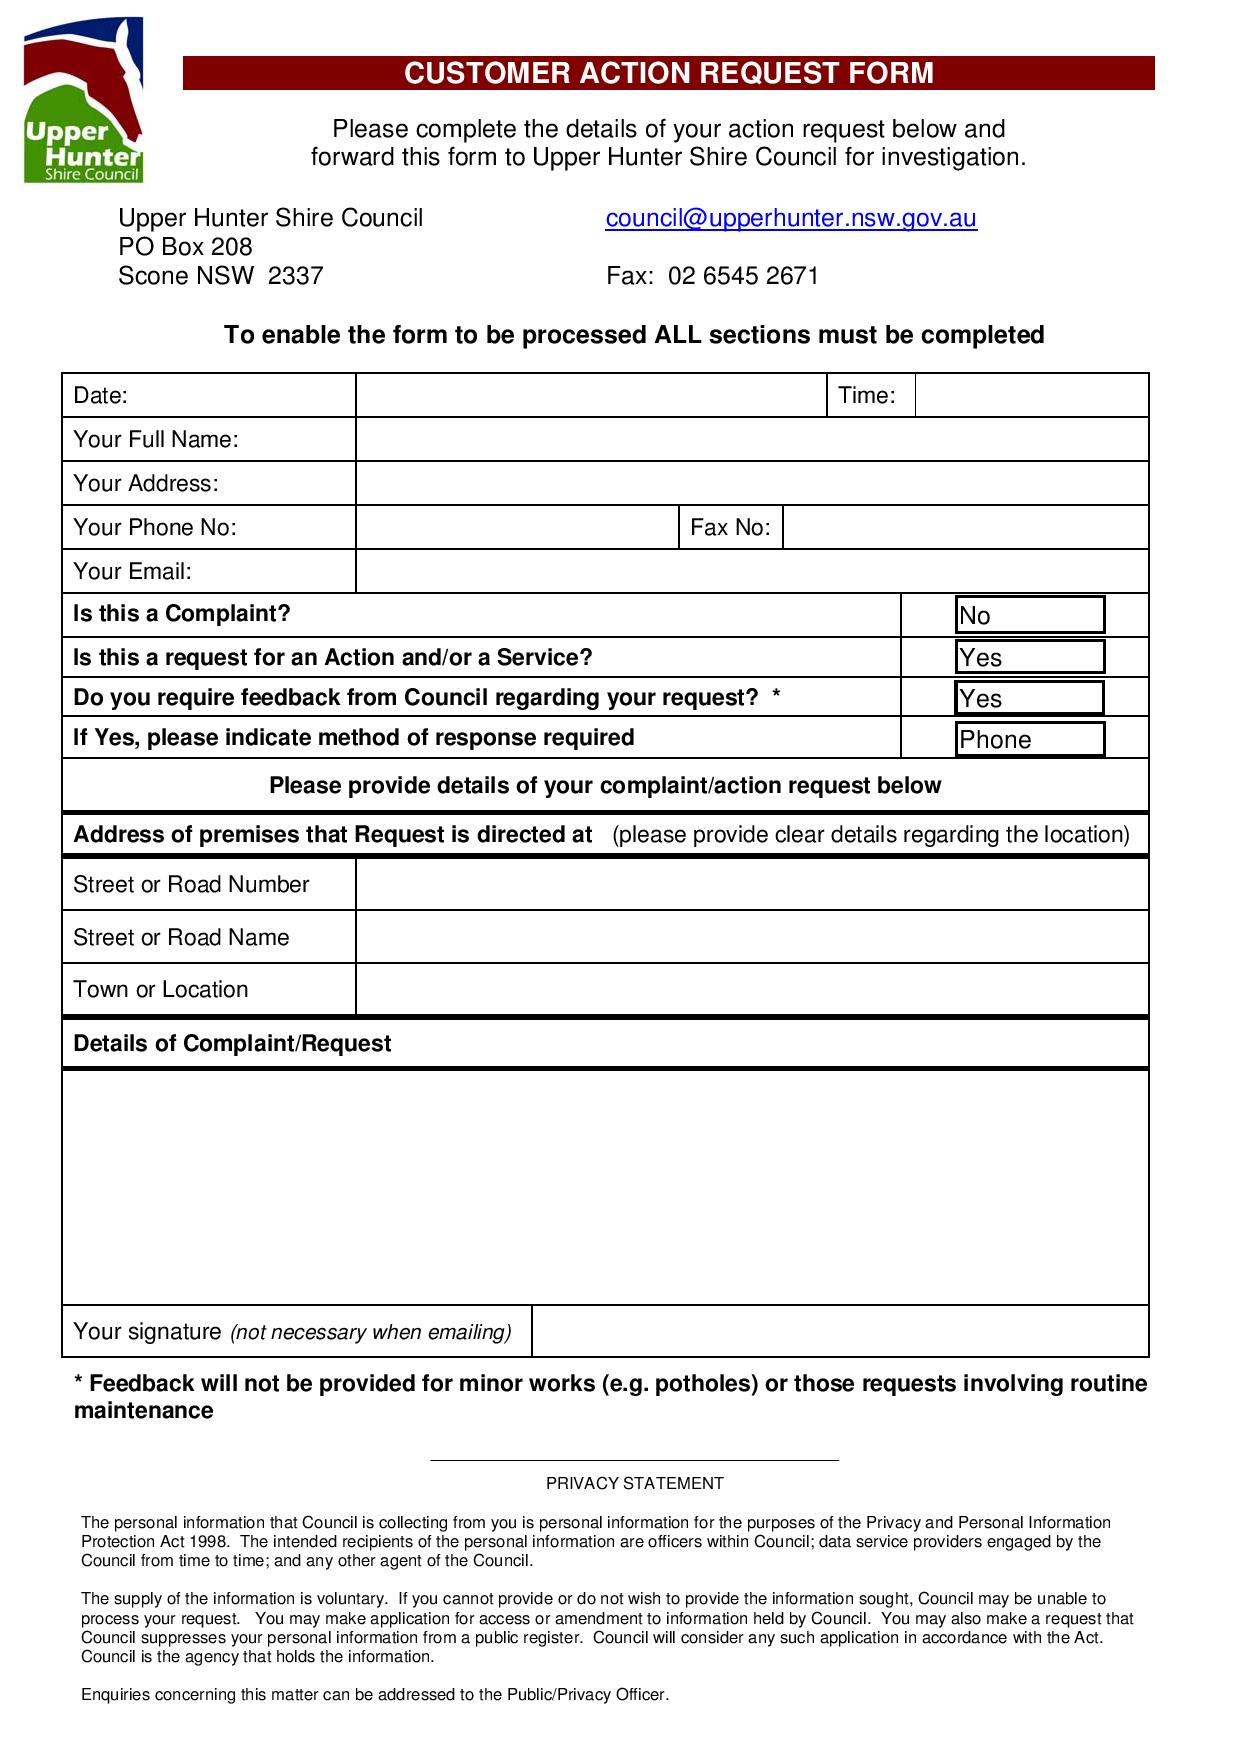 customer action request form page 0011